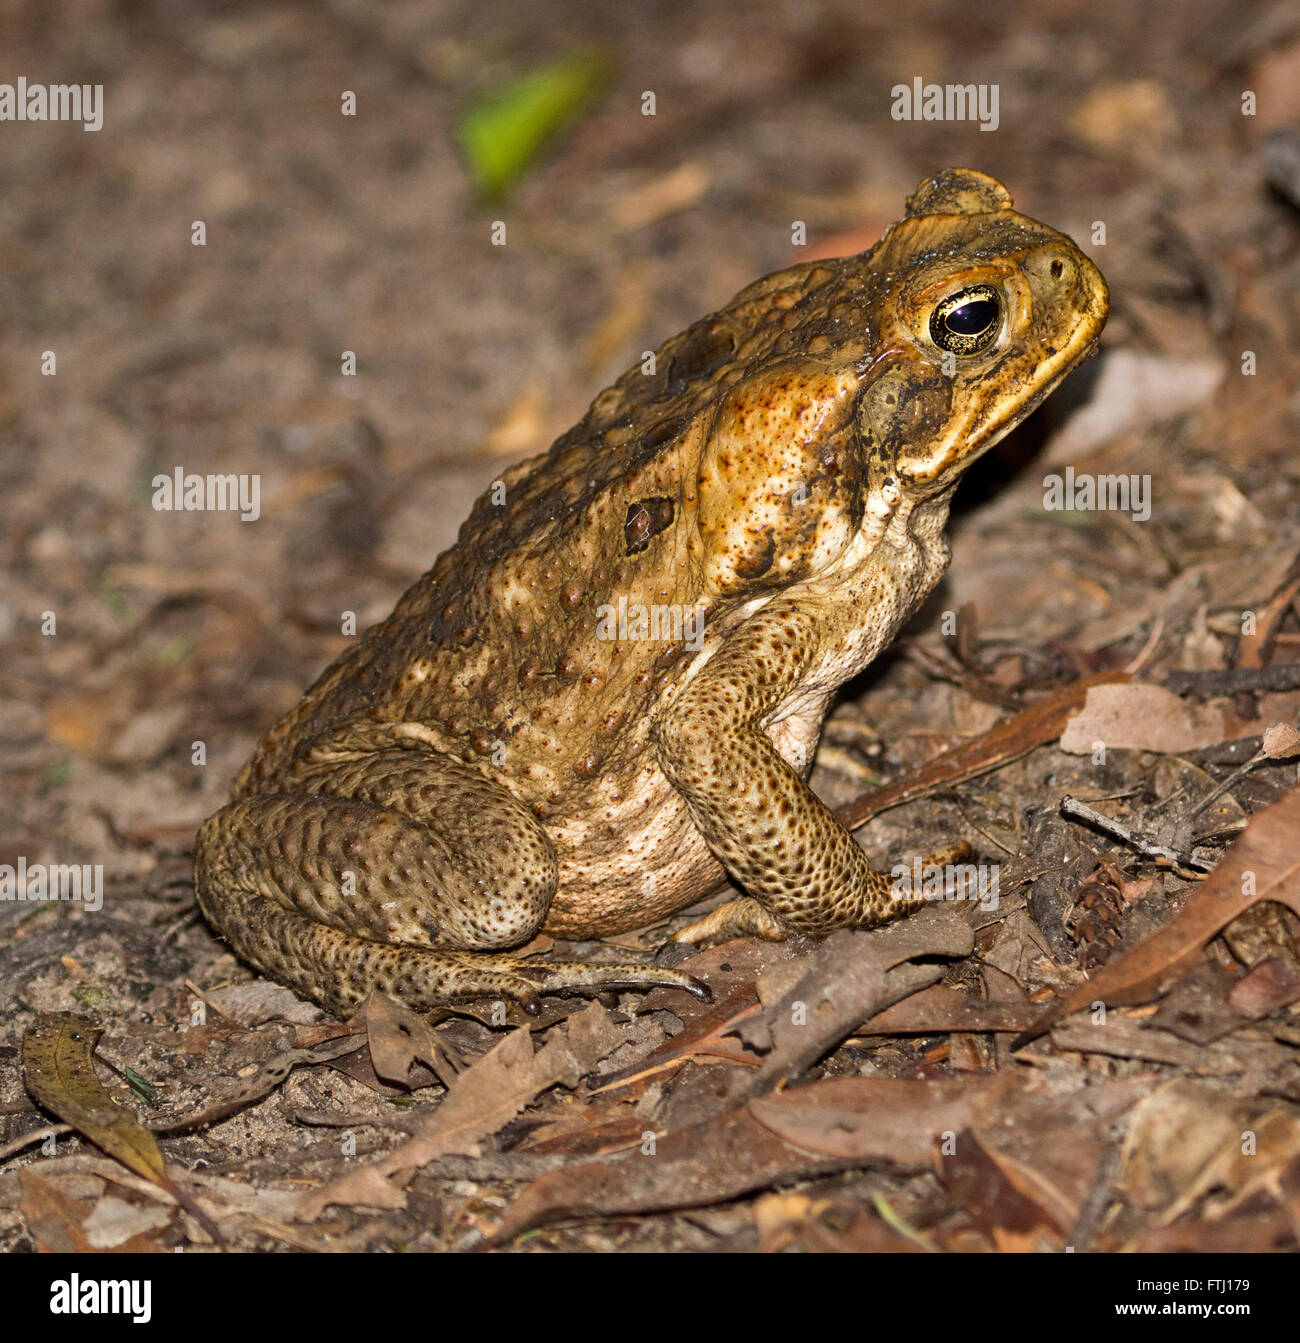 Cane toad, Bufo marinus, environmental pest in typical upright sitting pose with bright eye, among dry leaves in garden i8n Queensland Australia Stock Photo